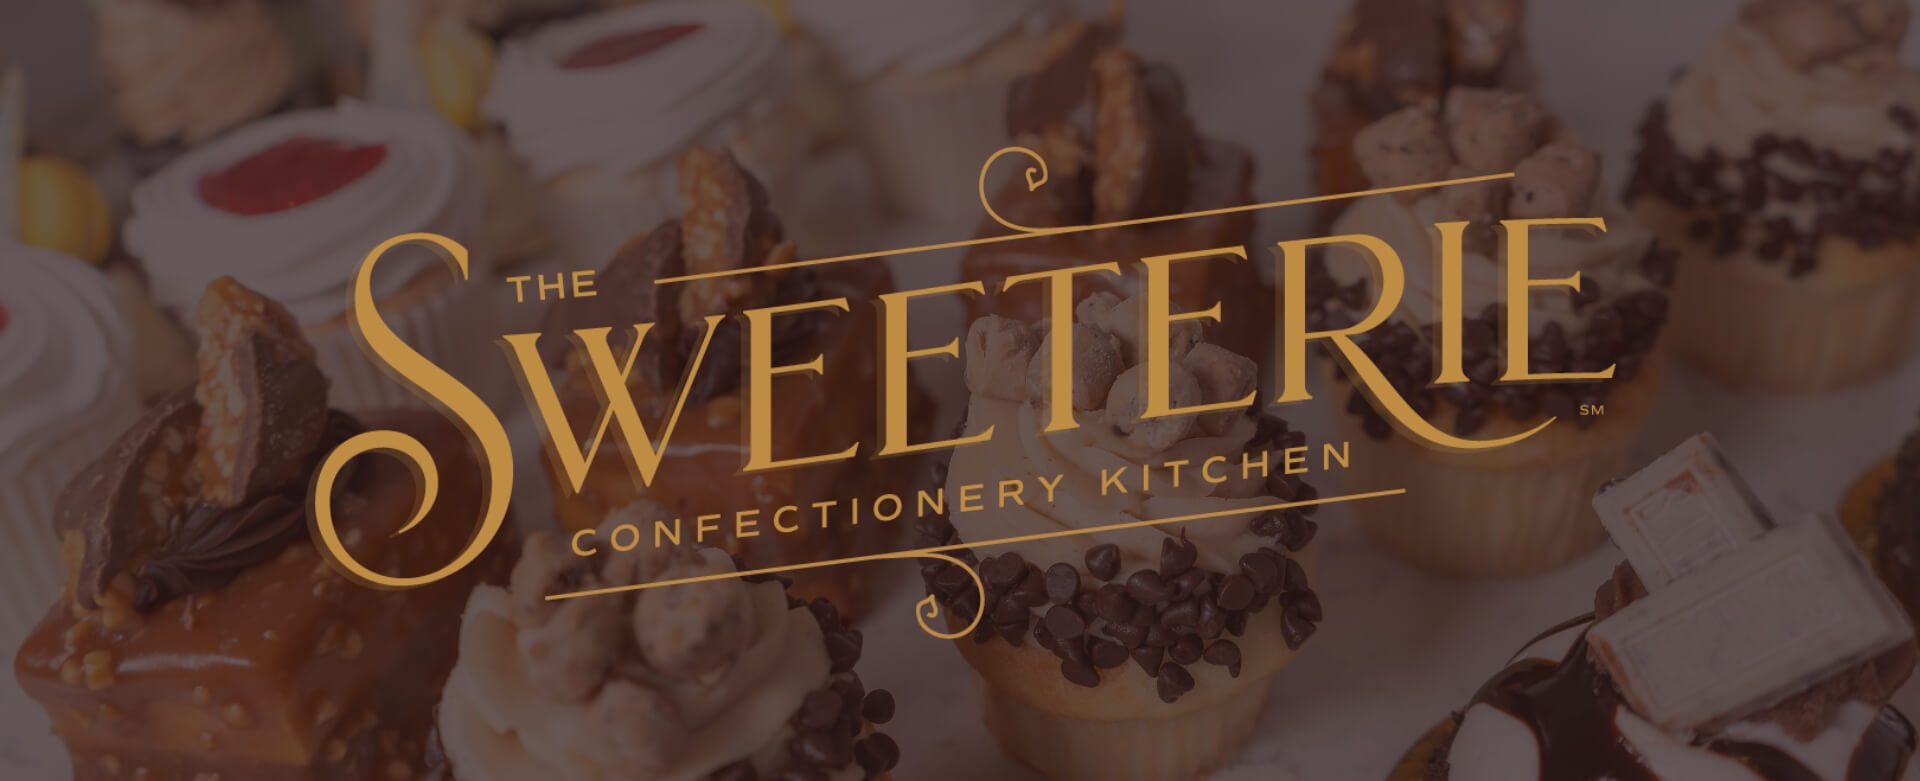 The sweeterie logo